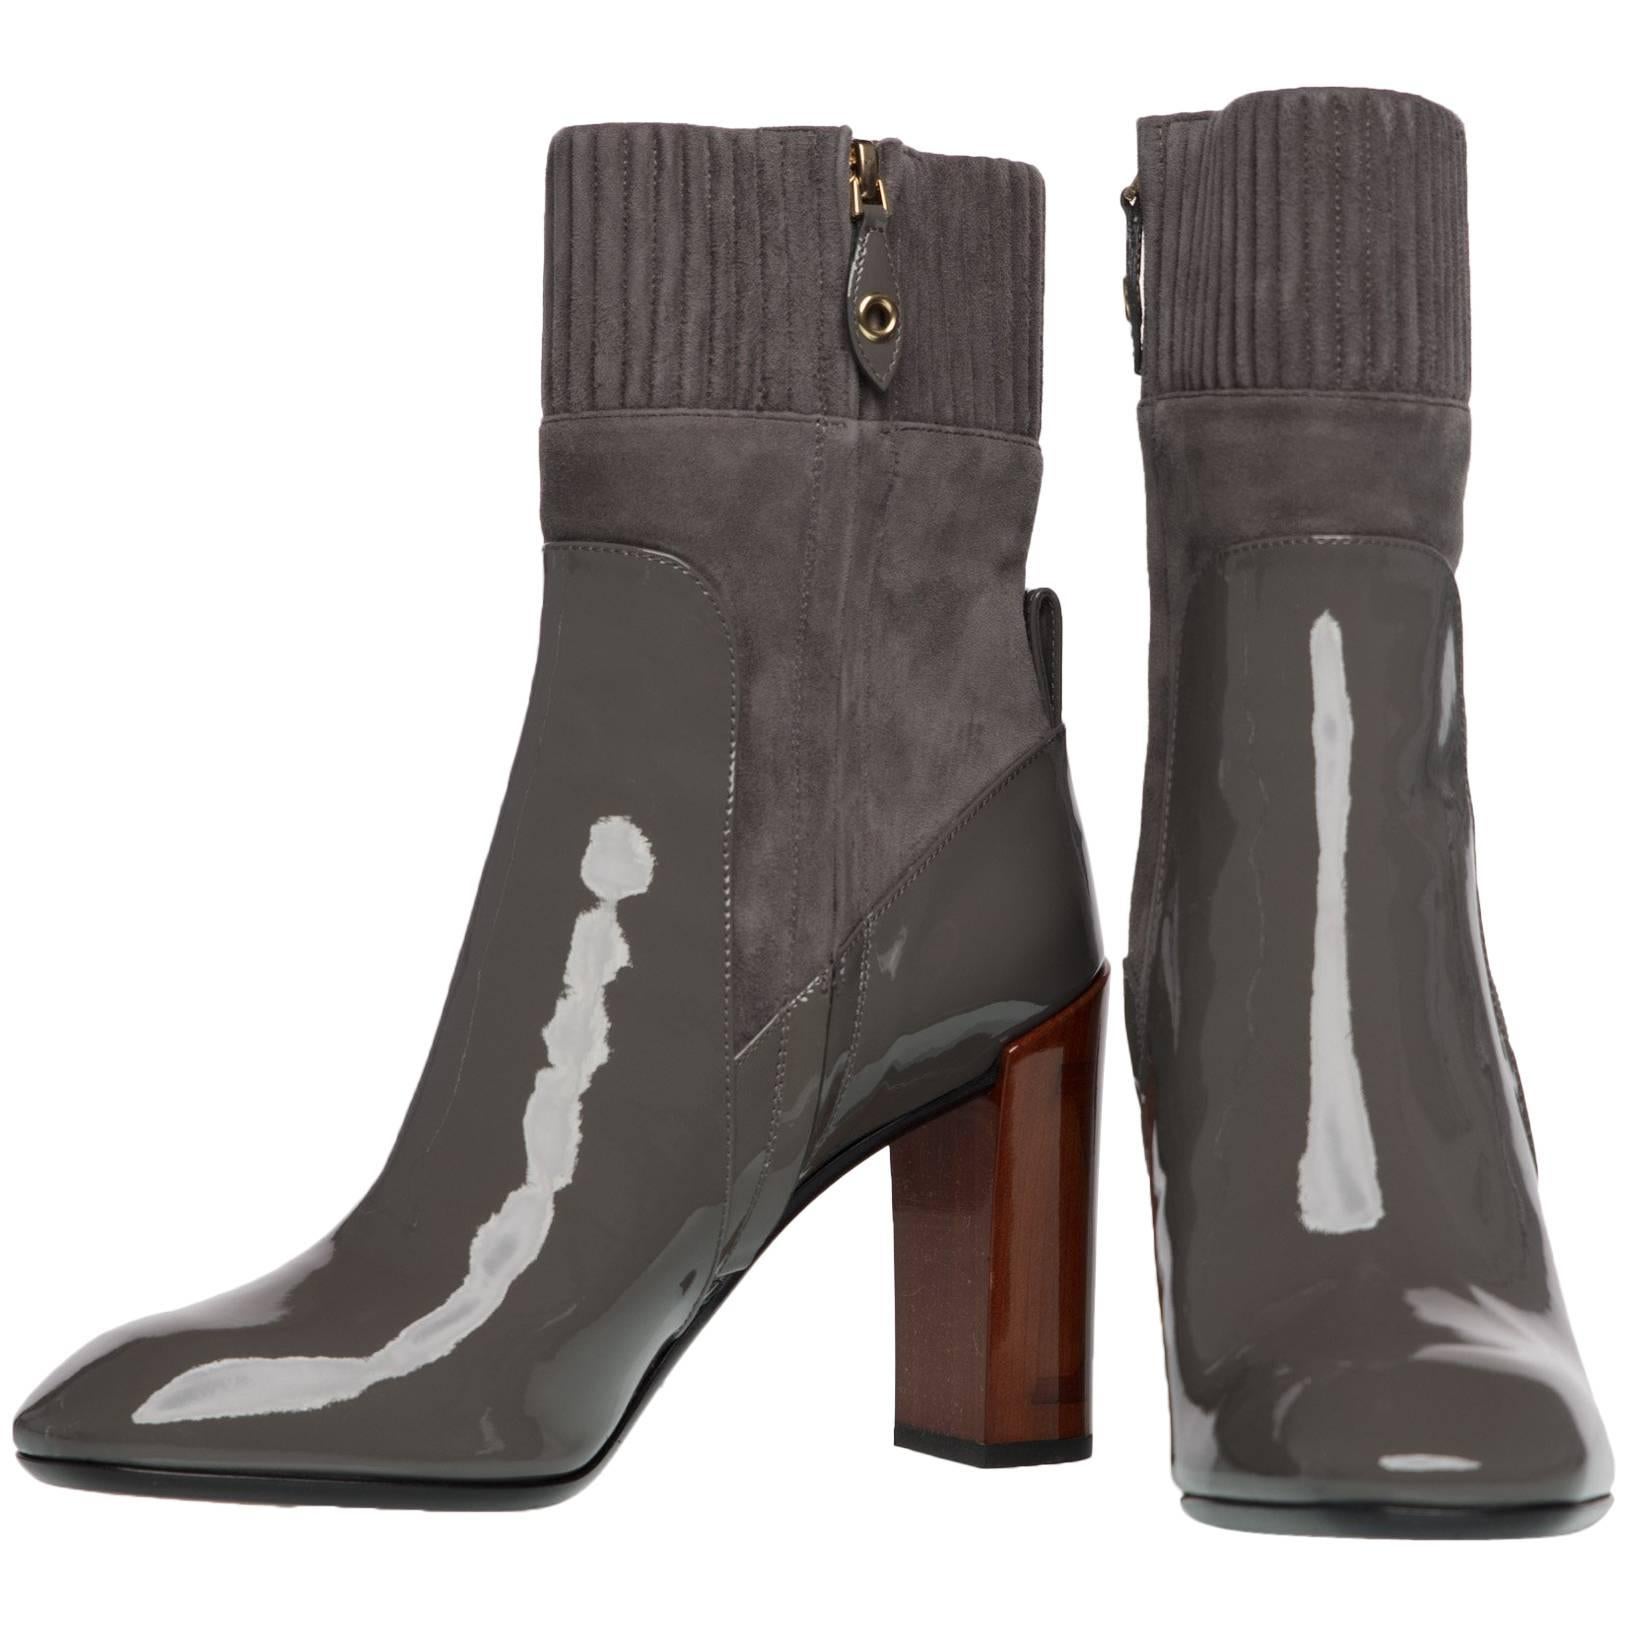 For the last 160 years Louis Vuitton Malletier has been honing its skills in fine leather goods. Originally focused on beautifully articulated travel trunks, this French fashion brand epitomizes luxury. These sleek boots are designed with full